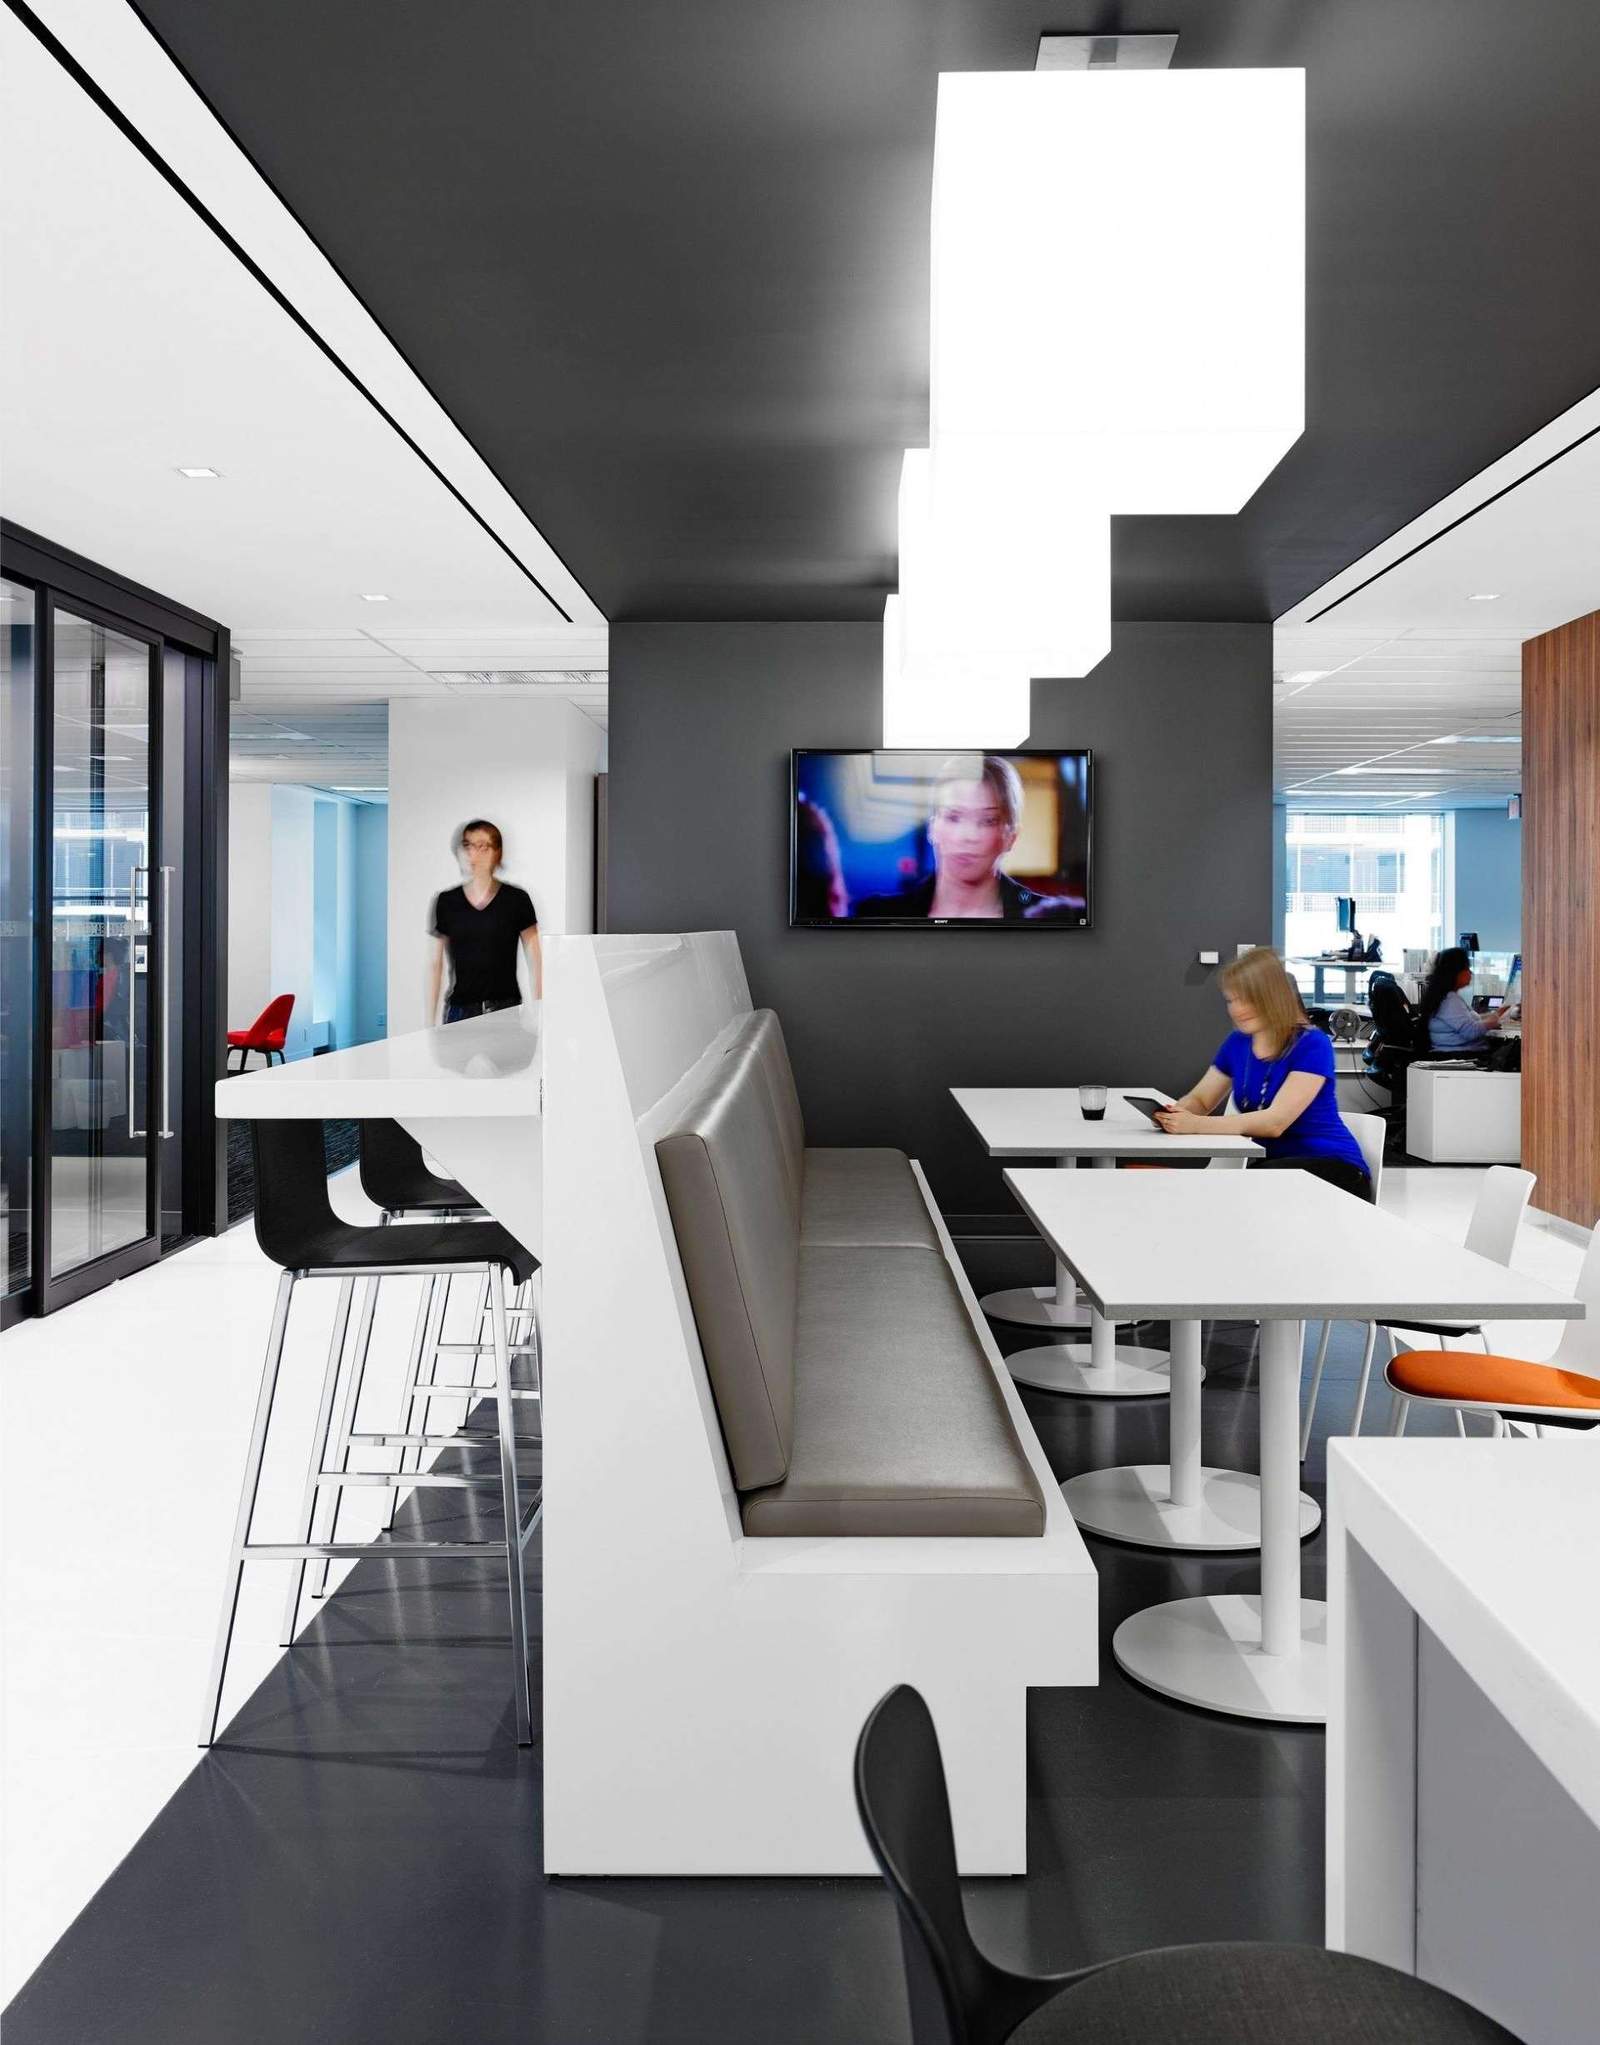 IPG MEDIABRANDS HQ OFFICE IPG Mediabrands needed a space that supported their equitable culture…